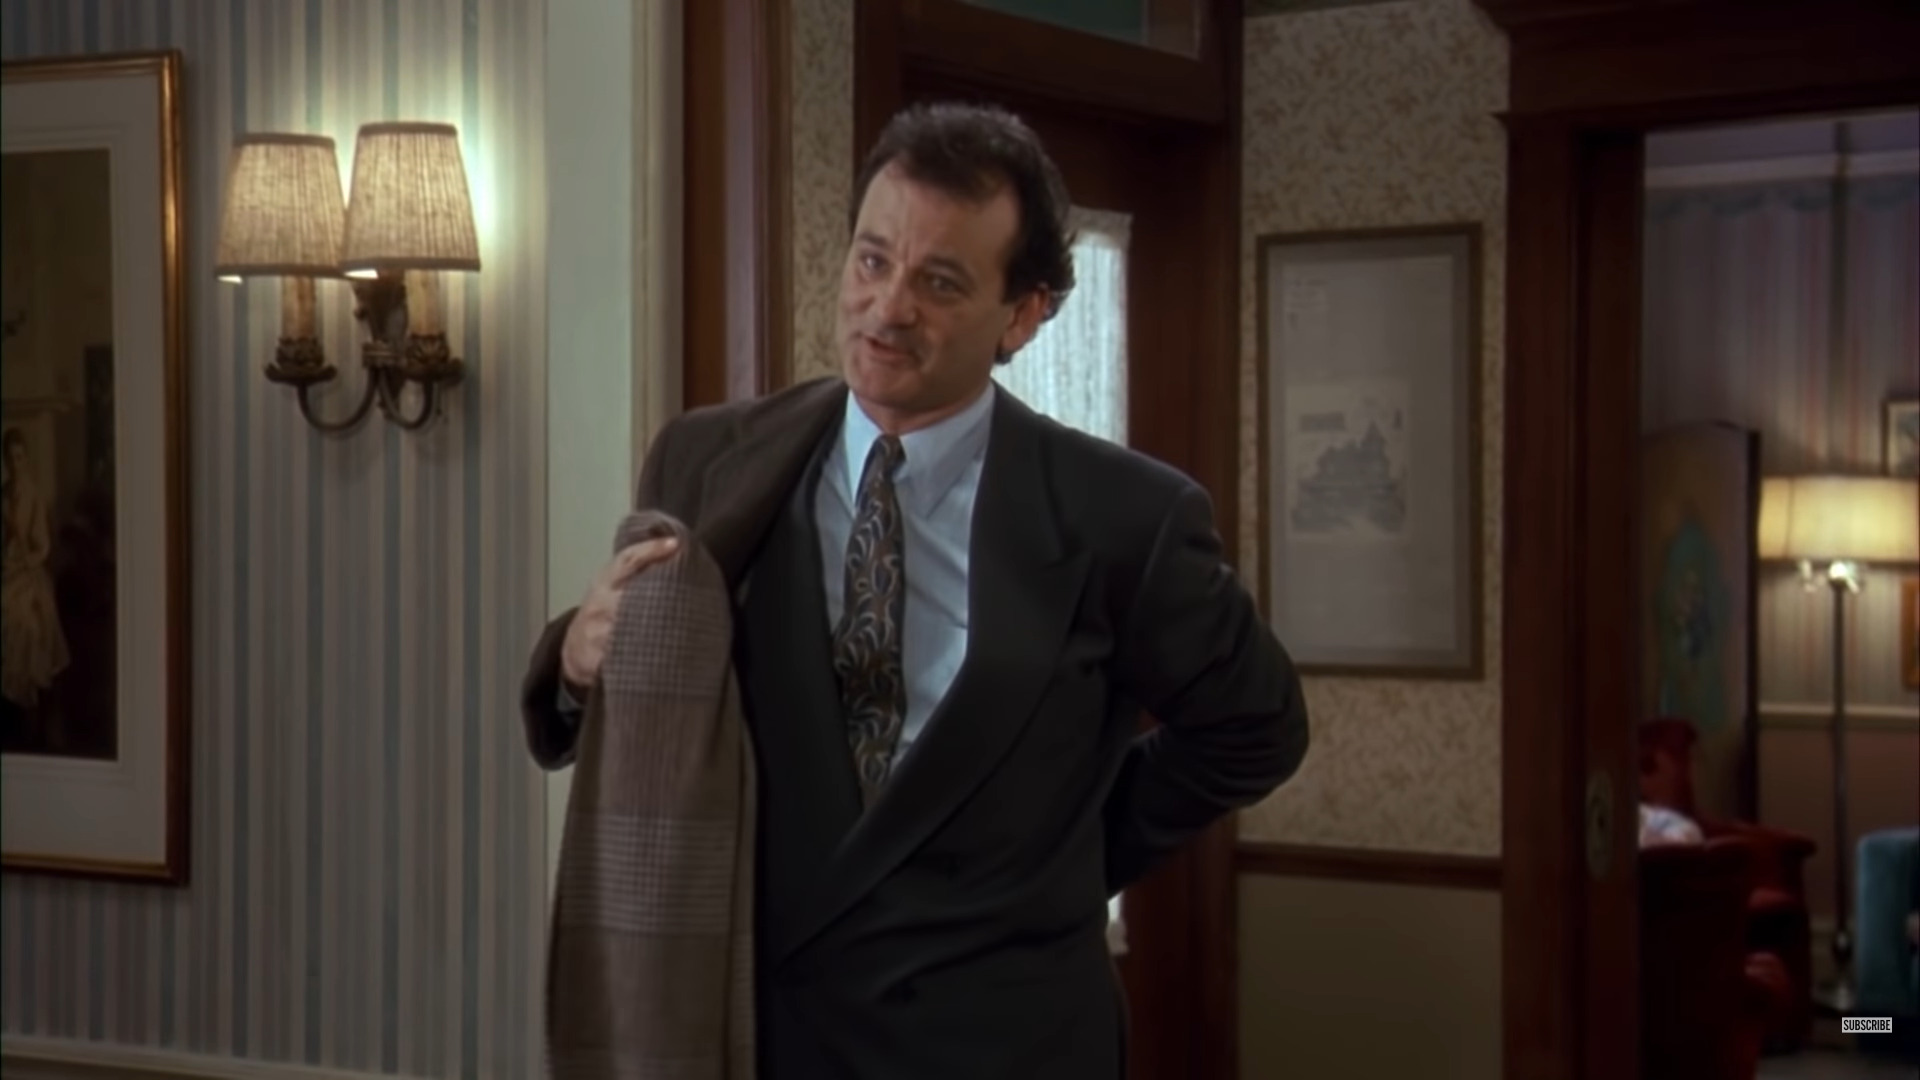 Groundhog Day: Where Was the 1993 Movie Filmed?